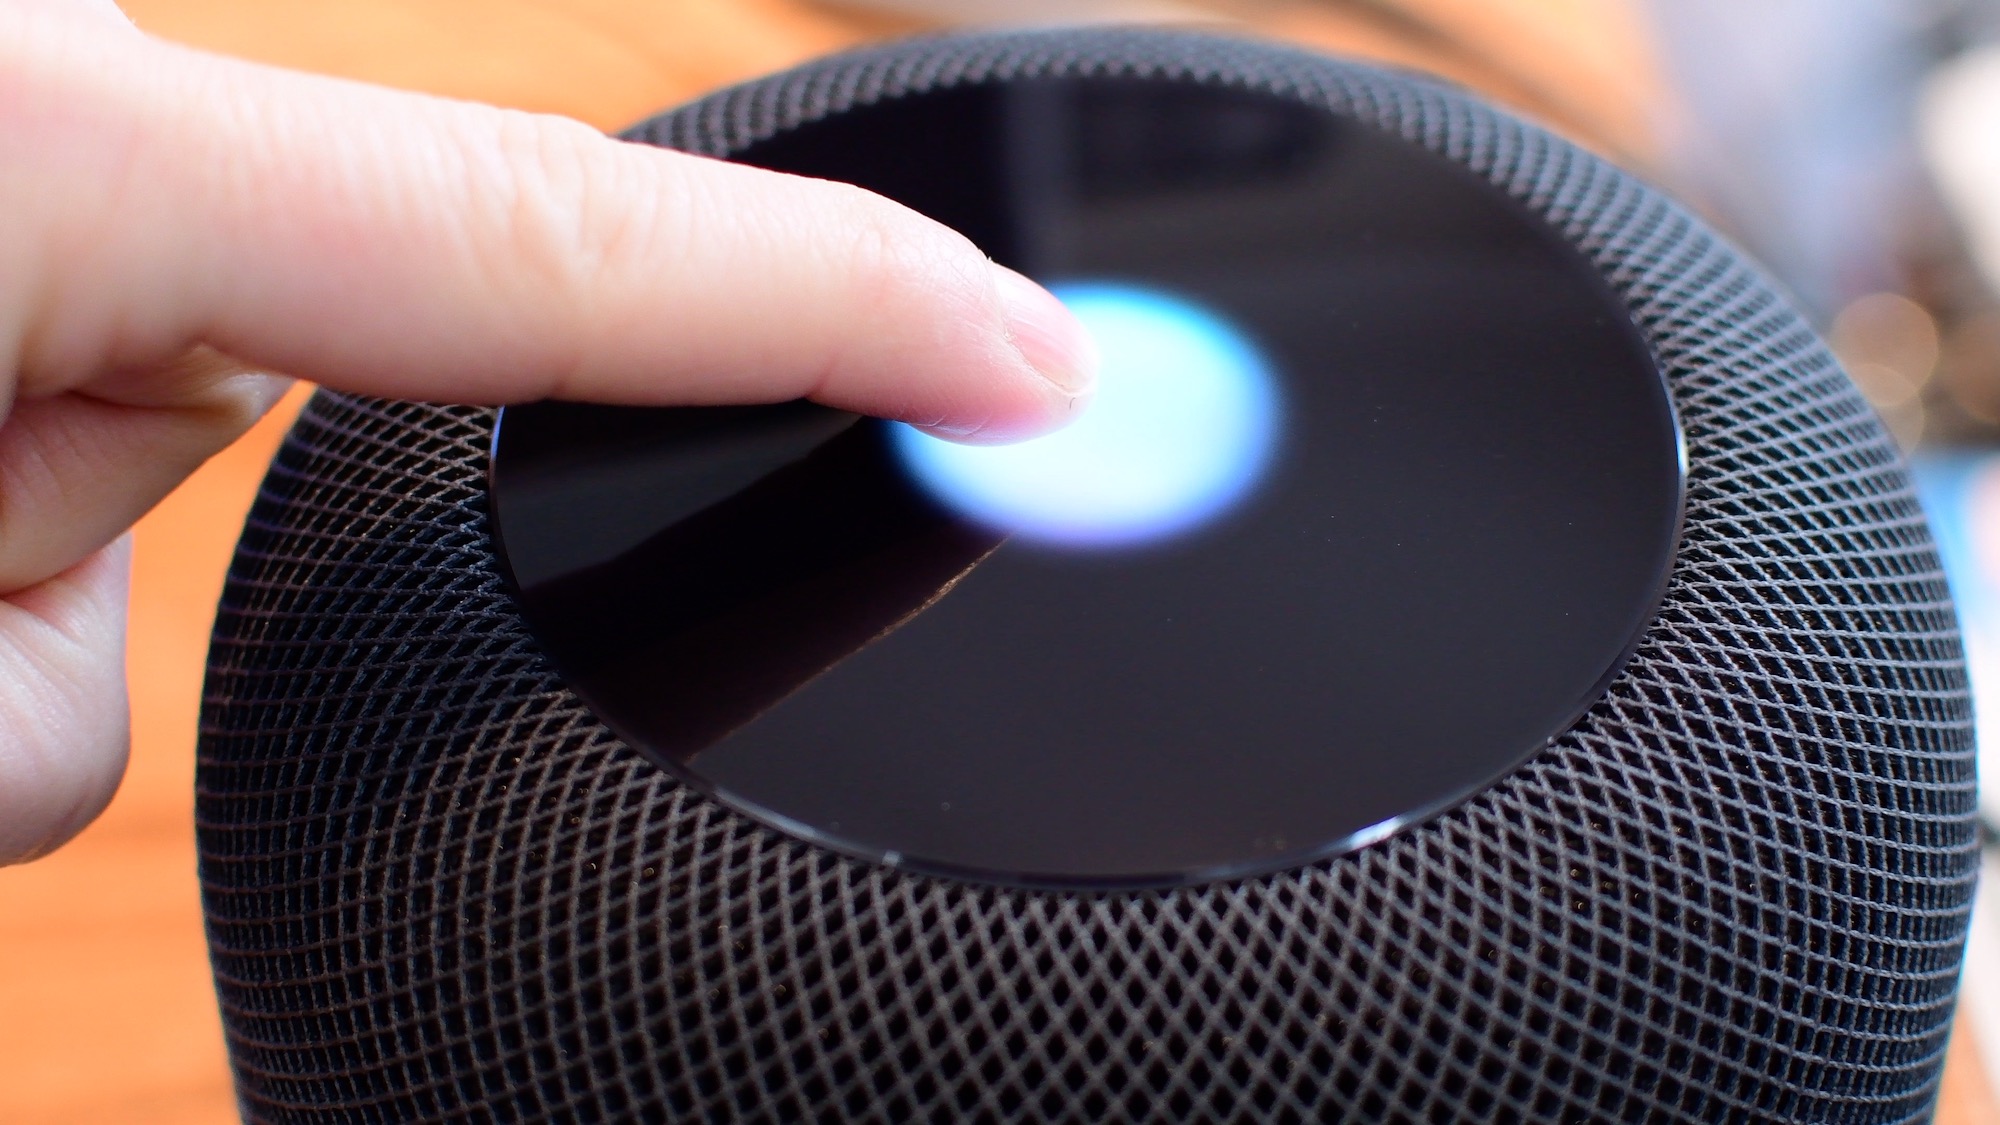 A closeup photograph of the HomePod's touch-sensitive surface displaying Siri orb graphics, with a male's index finger pointed at the speaker's top